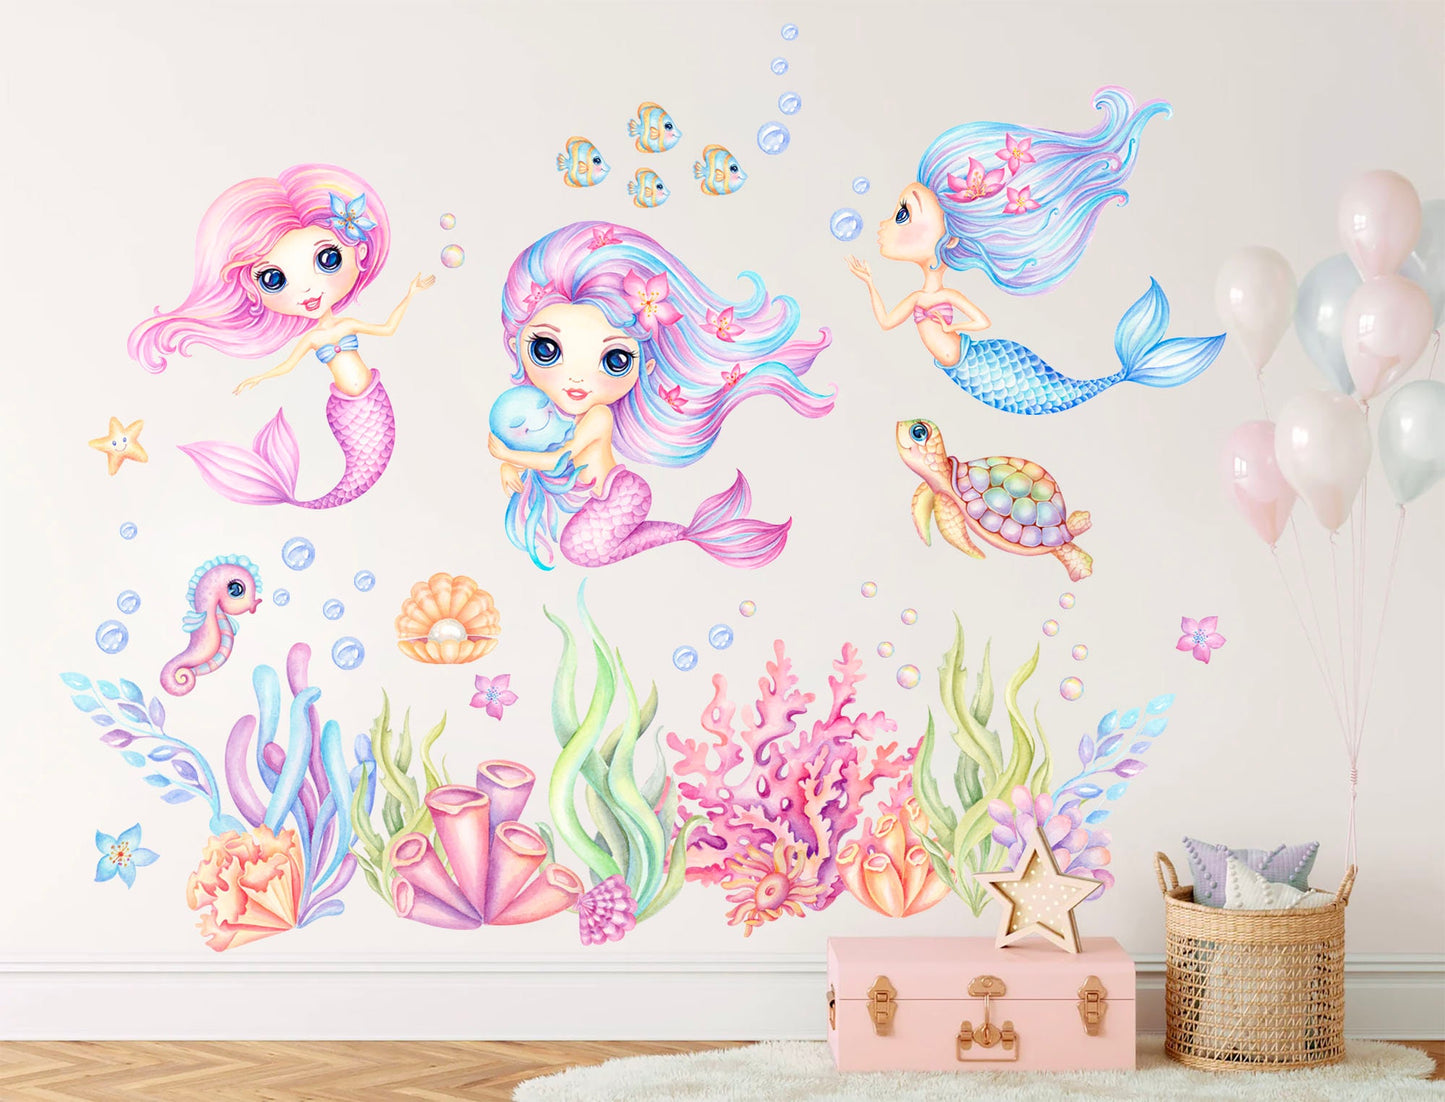 Mermaids Underwater Adventure Wall Decal - Seashells Coral Seahorse Turtle Jellyfish - Removable Peel and Stick - BR390